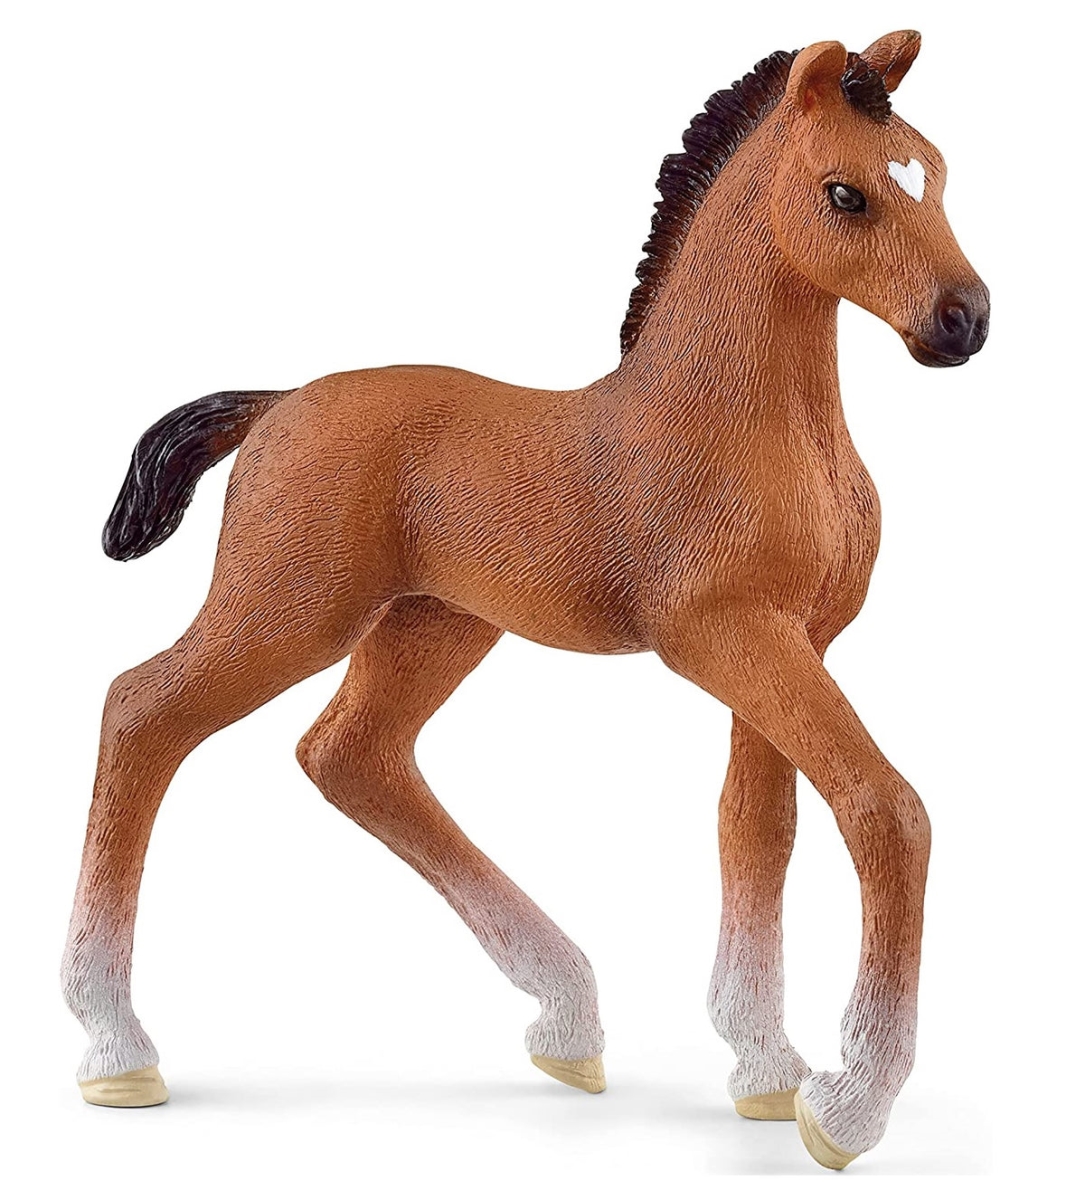 Picture of Schleich North America 105030 Plastic Oldenburg Foal Horse Toy Figurine - Pack of 5